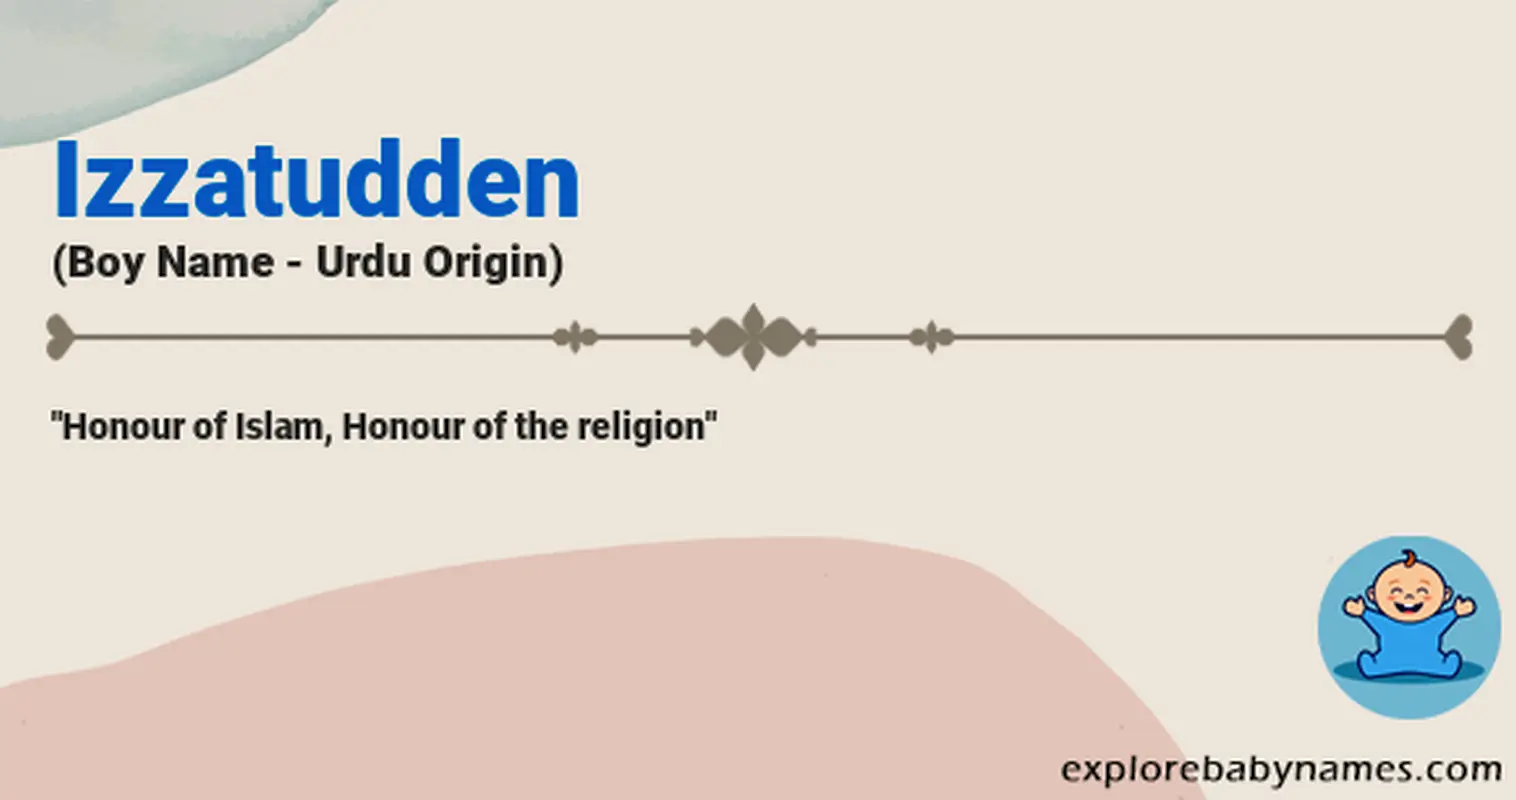 Meaning of Izzatudden